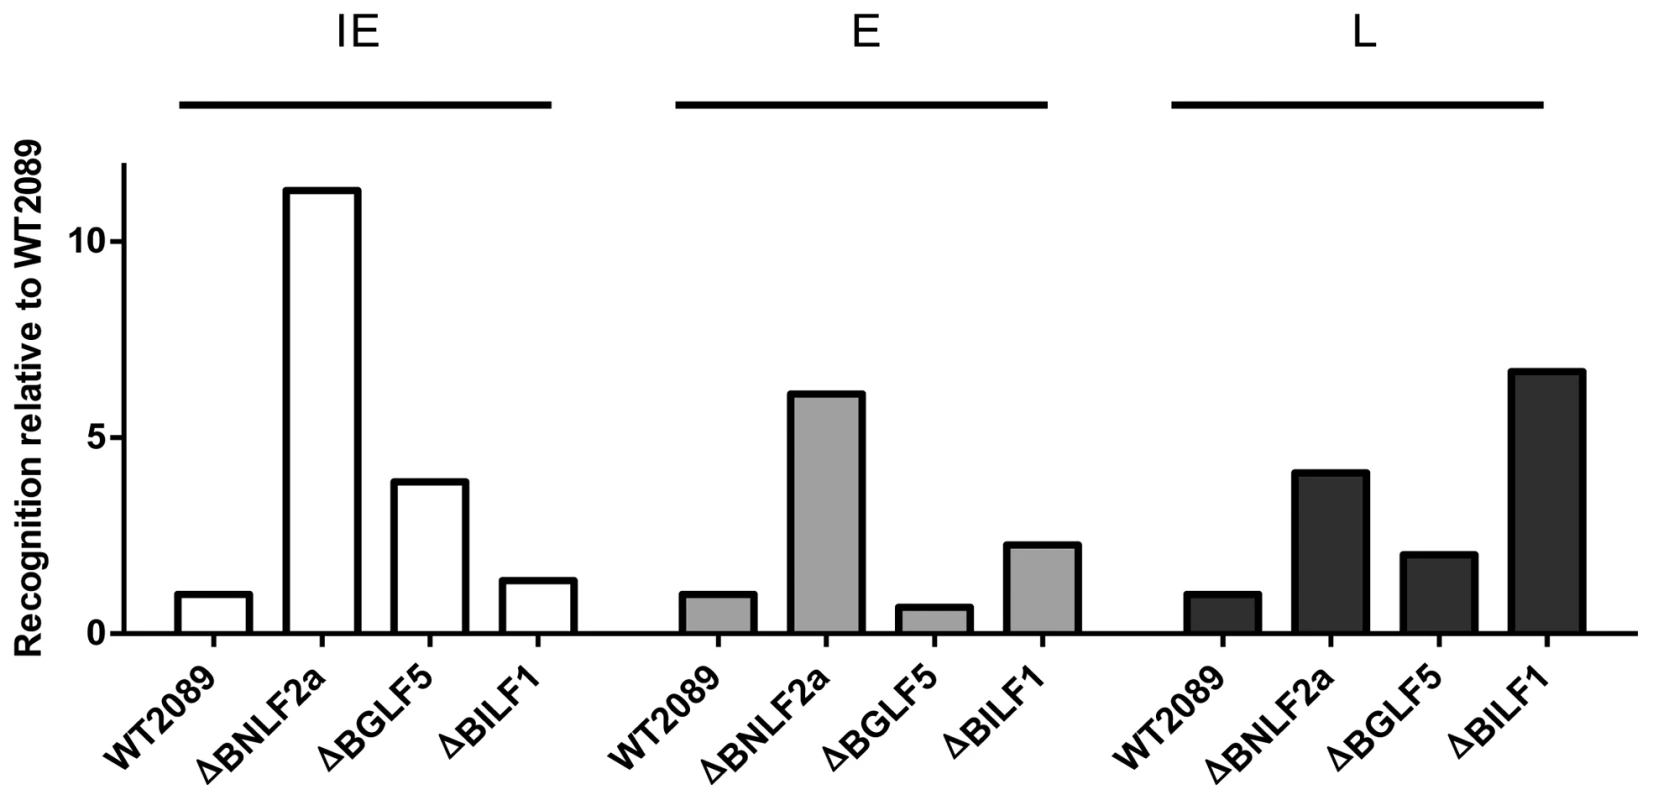 Direct comparison of the relative effects of BNLF2a, BGLF5 and BILF1 on T cell recognition of IE, E and L lytic epitopes using B-cells transformed with ΔBNLF2a, ΔBGLF5 and ΔBILF1 viruses.